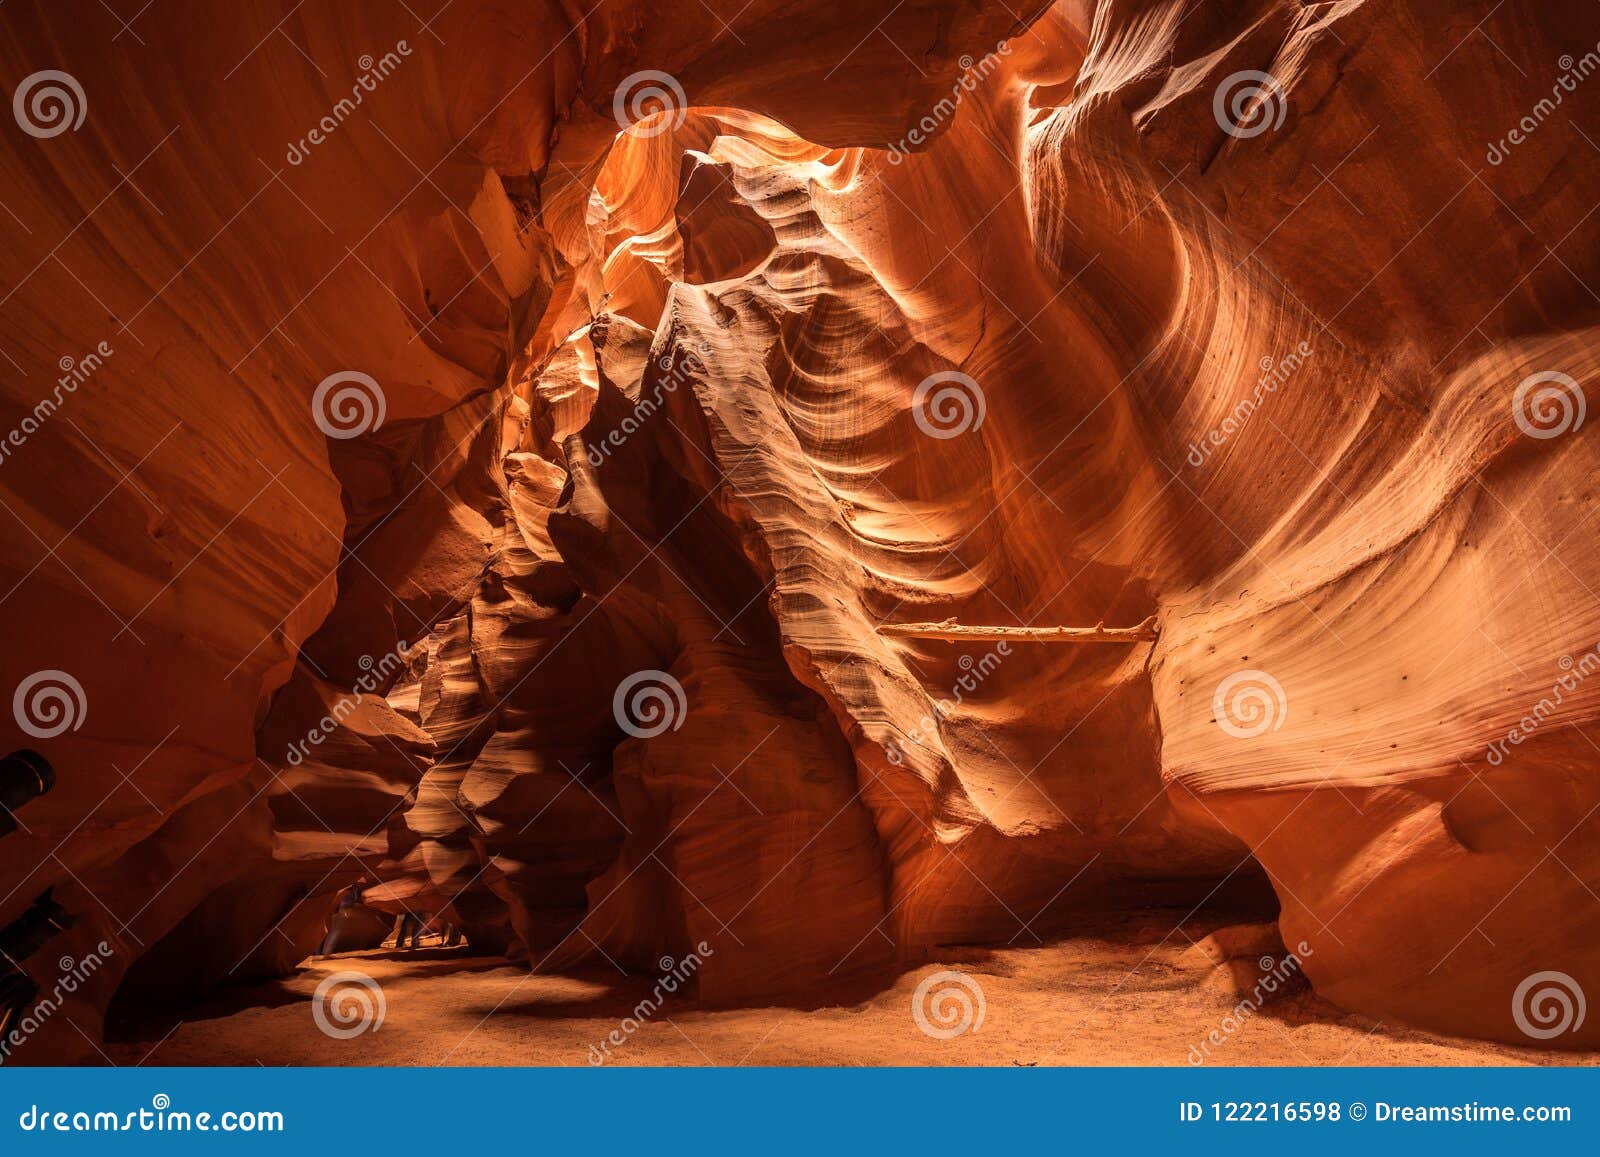 upper antelope canyon is the red sand rock cave on the desert, it& x27;s situated in page, arizona, united state of america.